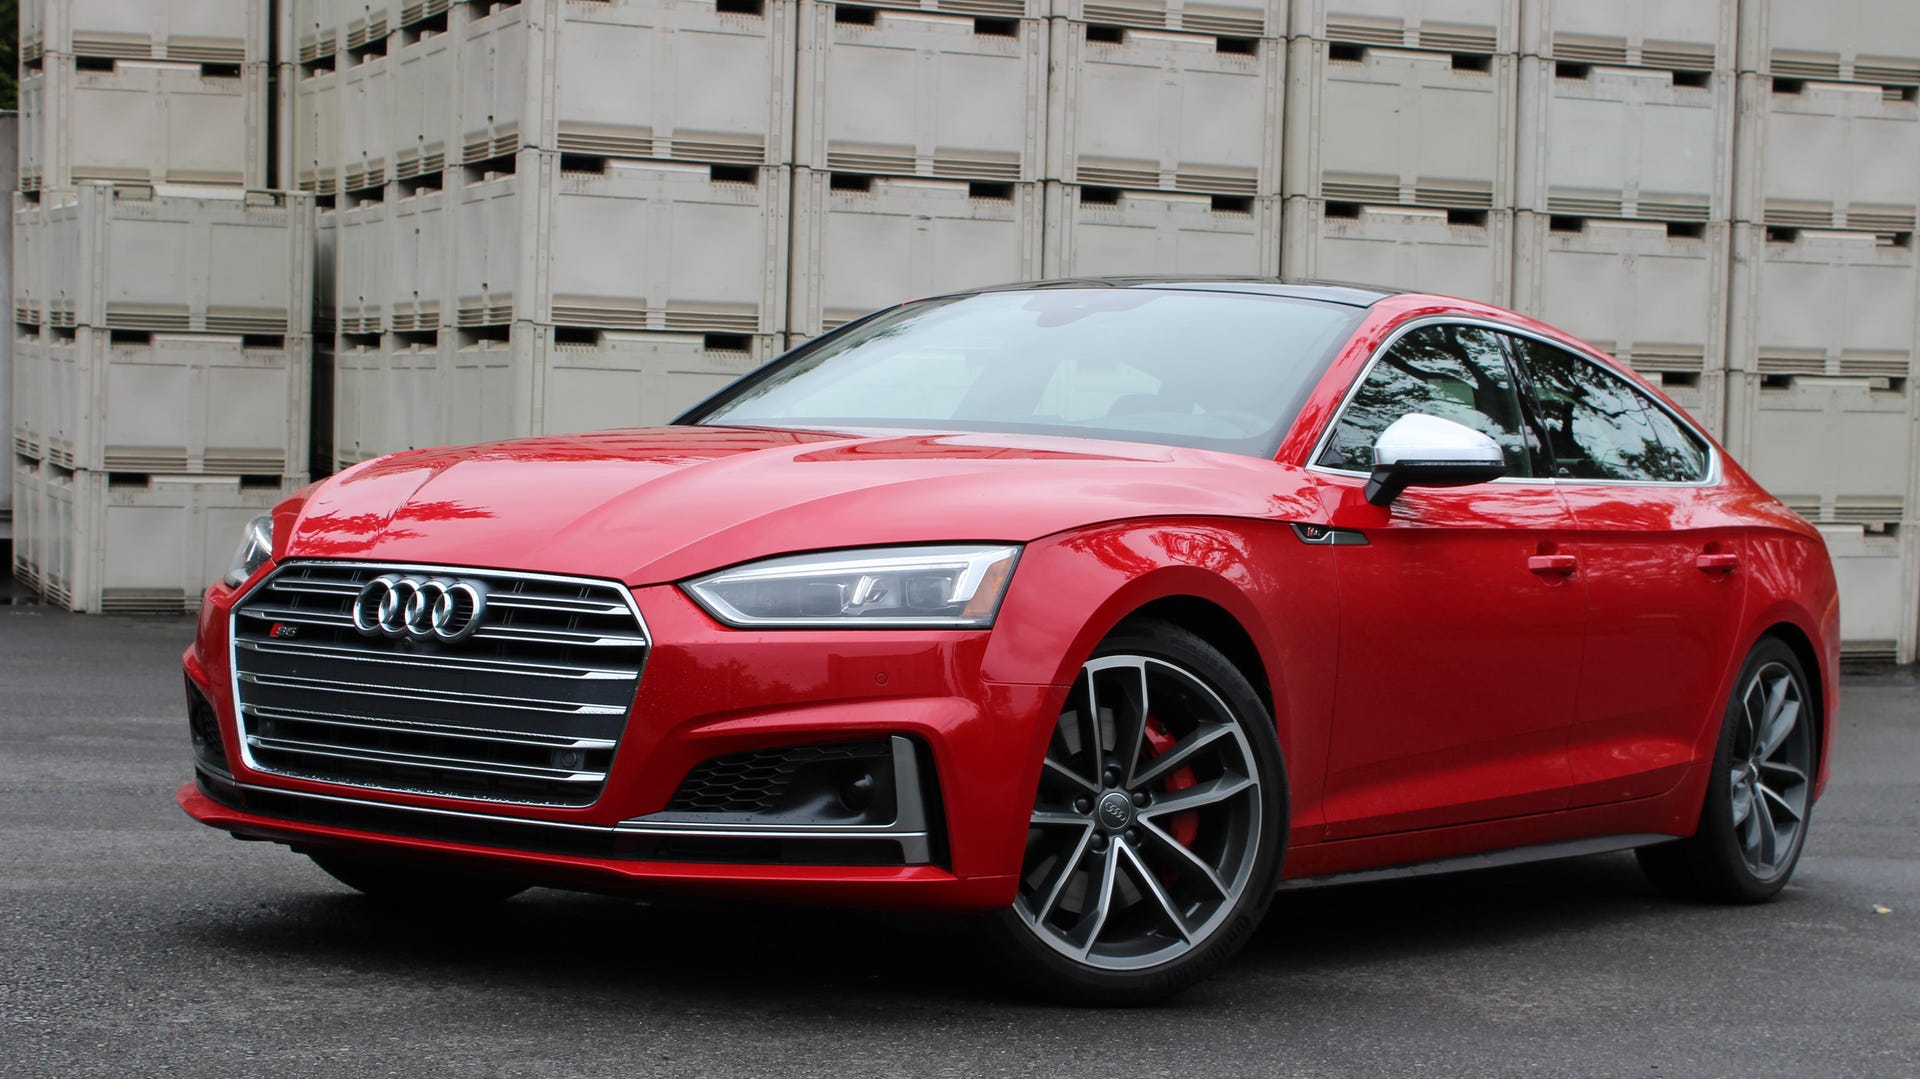 2018 Audi S5 in Tango Red over Rotor Gray